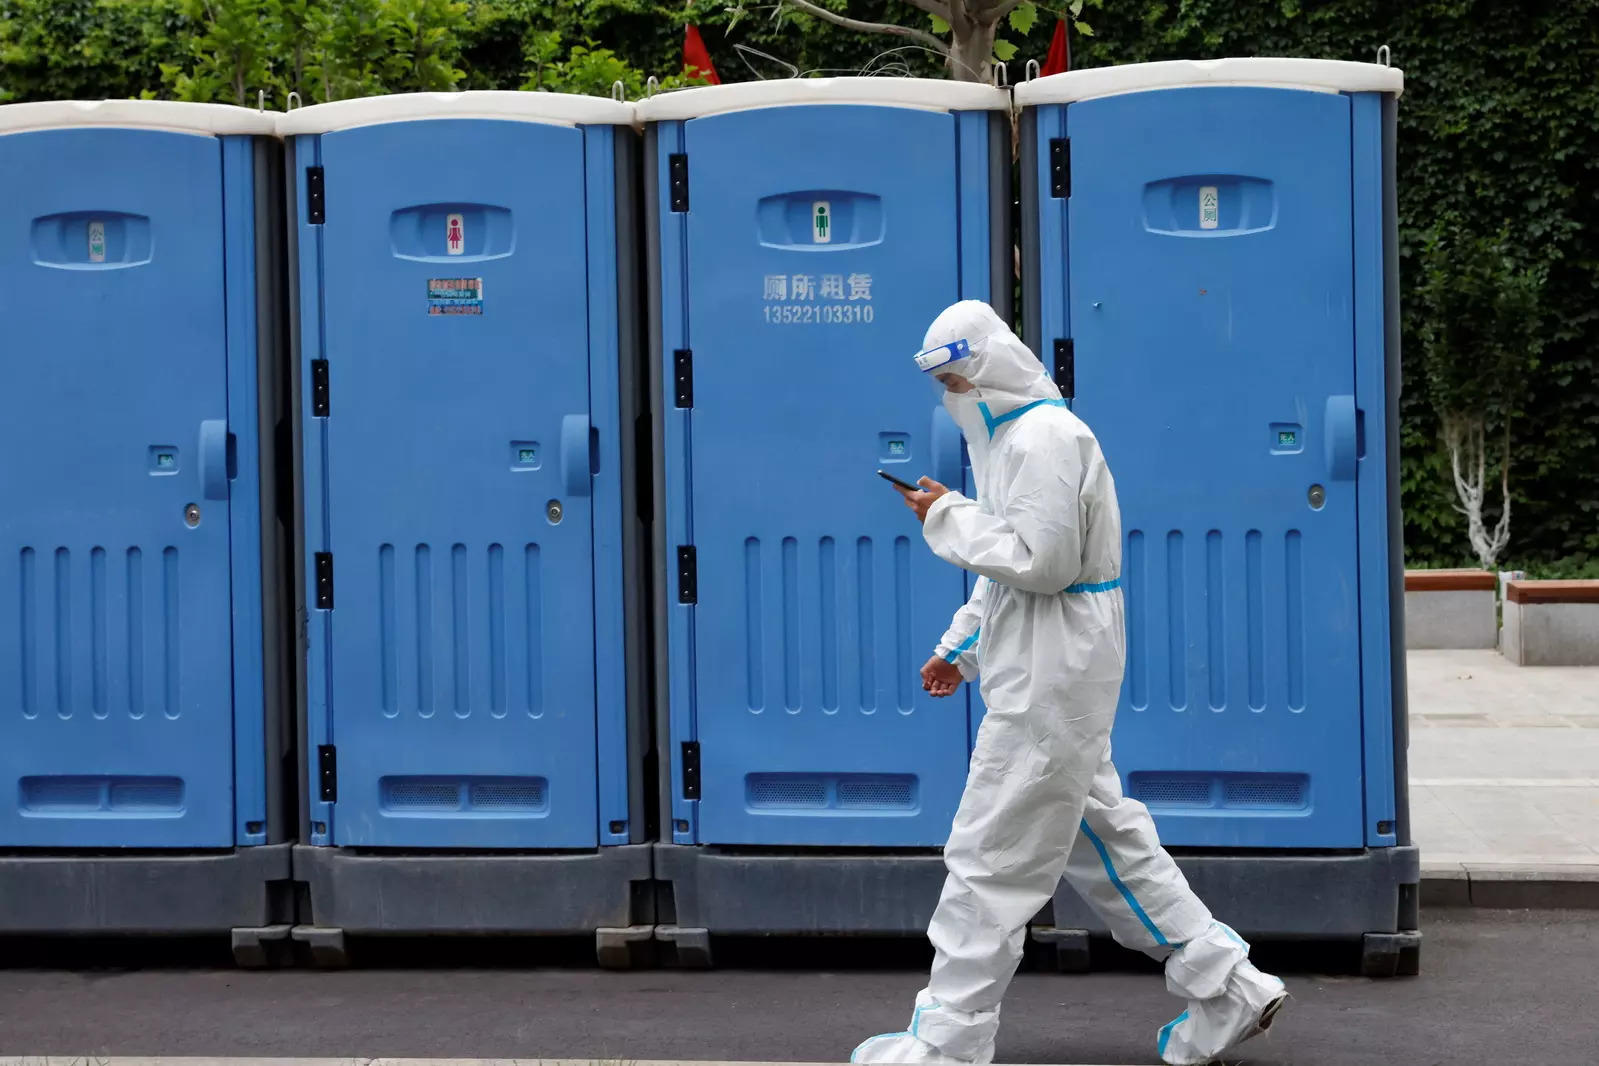  A worker in a protective suit walks past mobile toilets near an area under lockdown, amid the coronavirus disease (COVID-19) outbreak in Beijing, China May 12, 2022. REUTERS/Carlos Garcia Rawlins